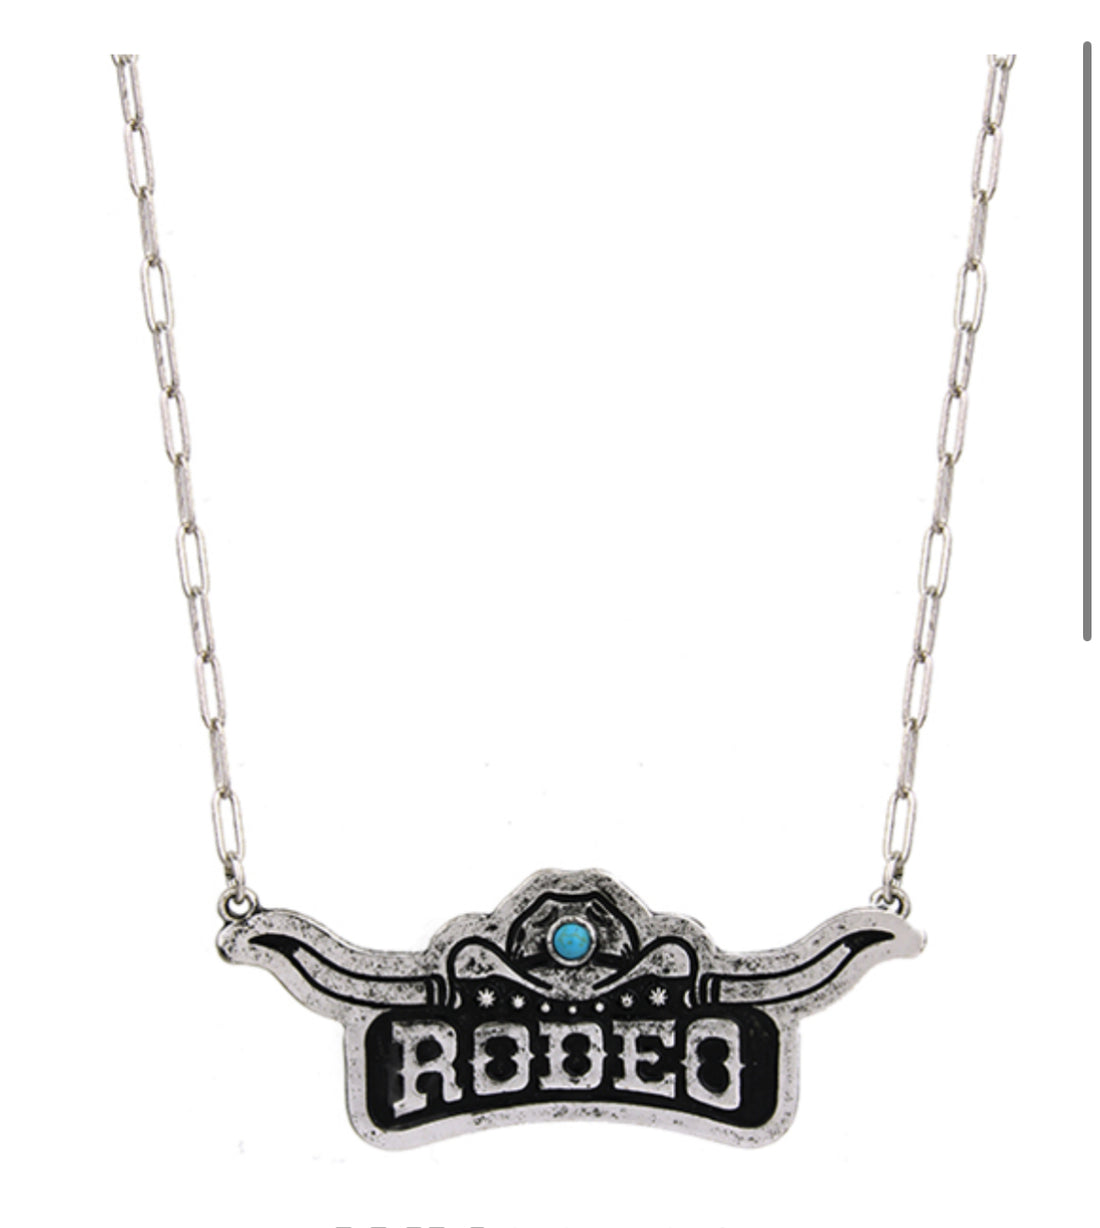 Burnished Silver Rodeo Steer Head Necklace